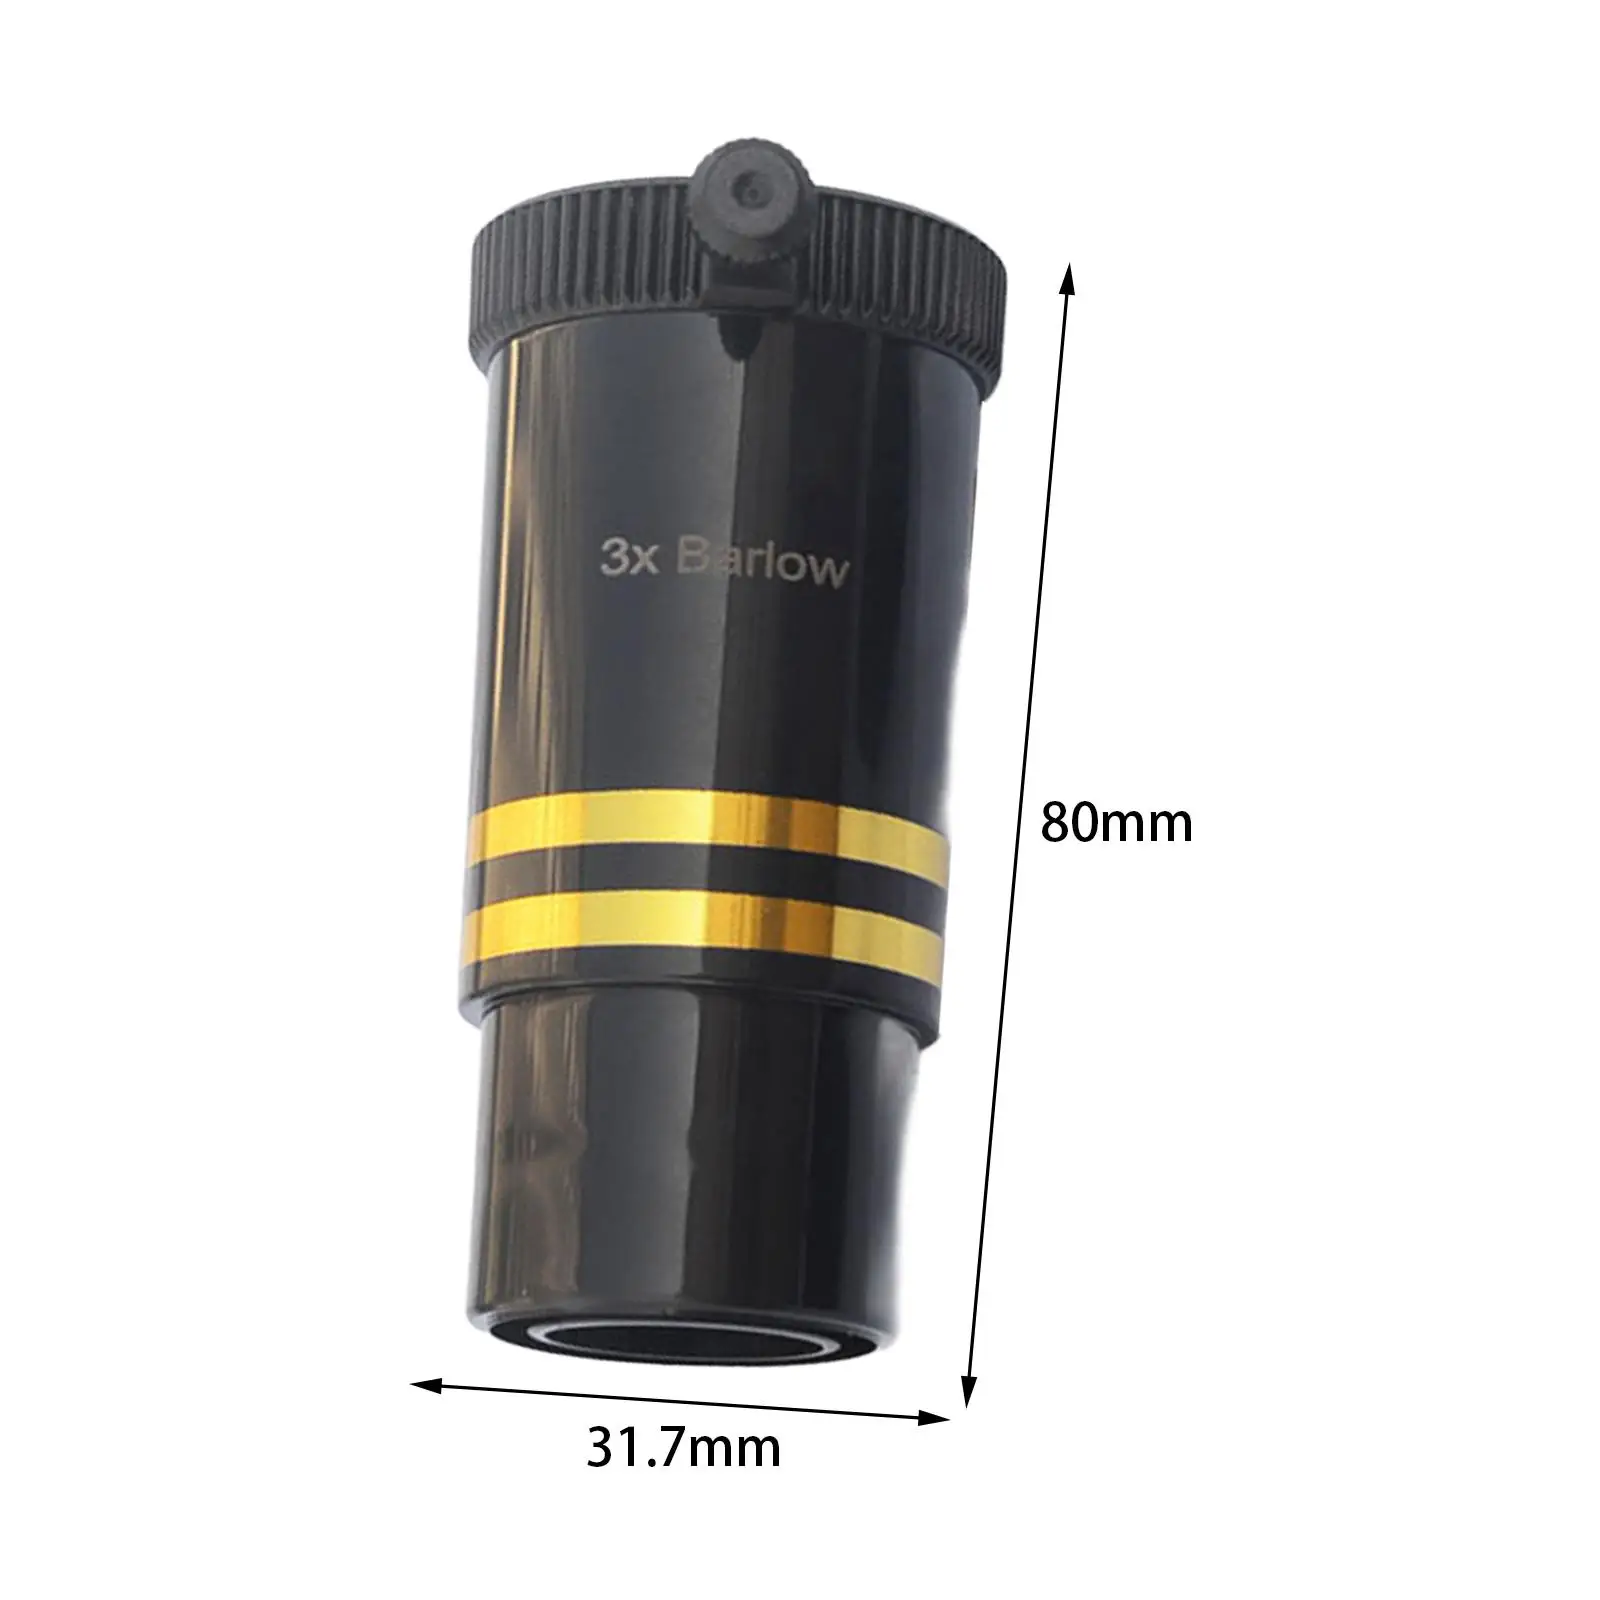 Barlow Lens 3x Multi Coated 1.25 inch Telescope Accessories Telescope Barlow Lens for Astronomical Visual Astronomy Photography